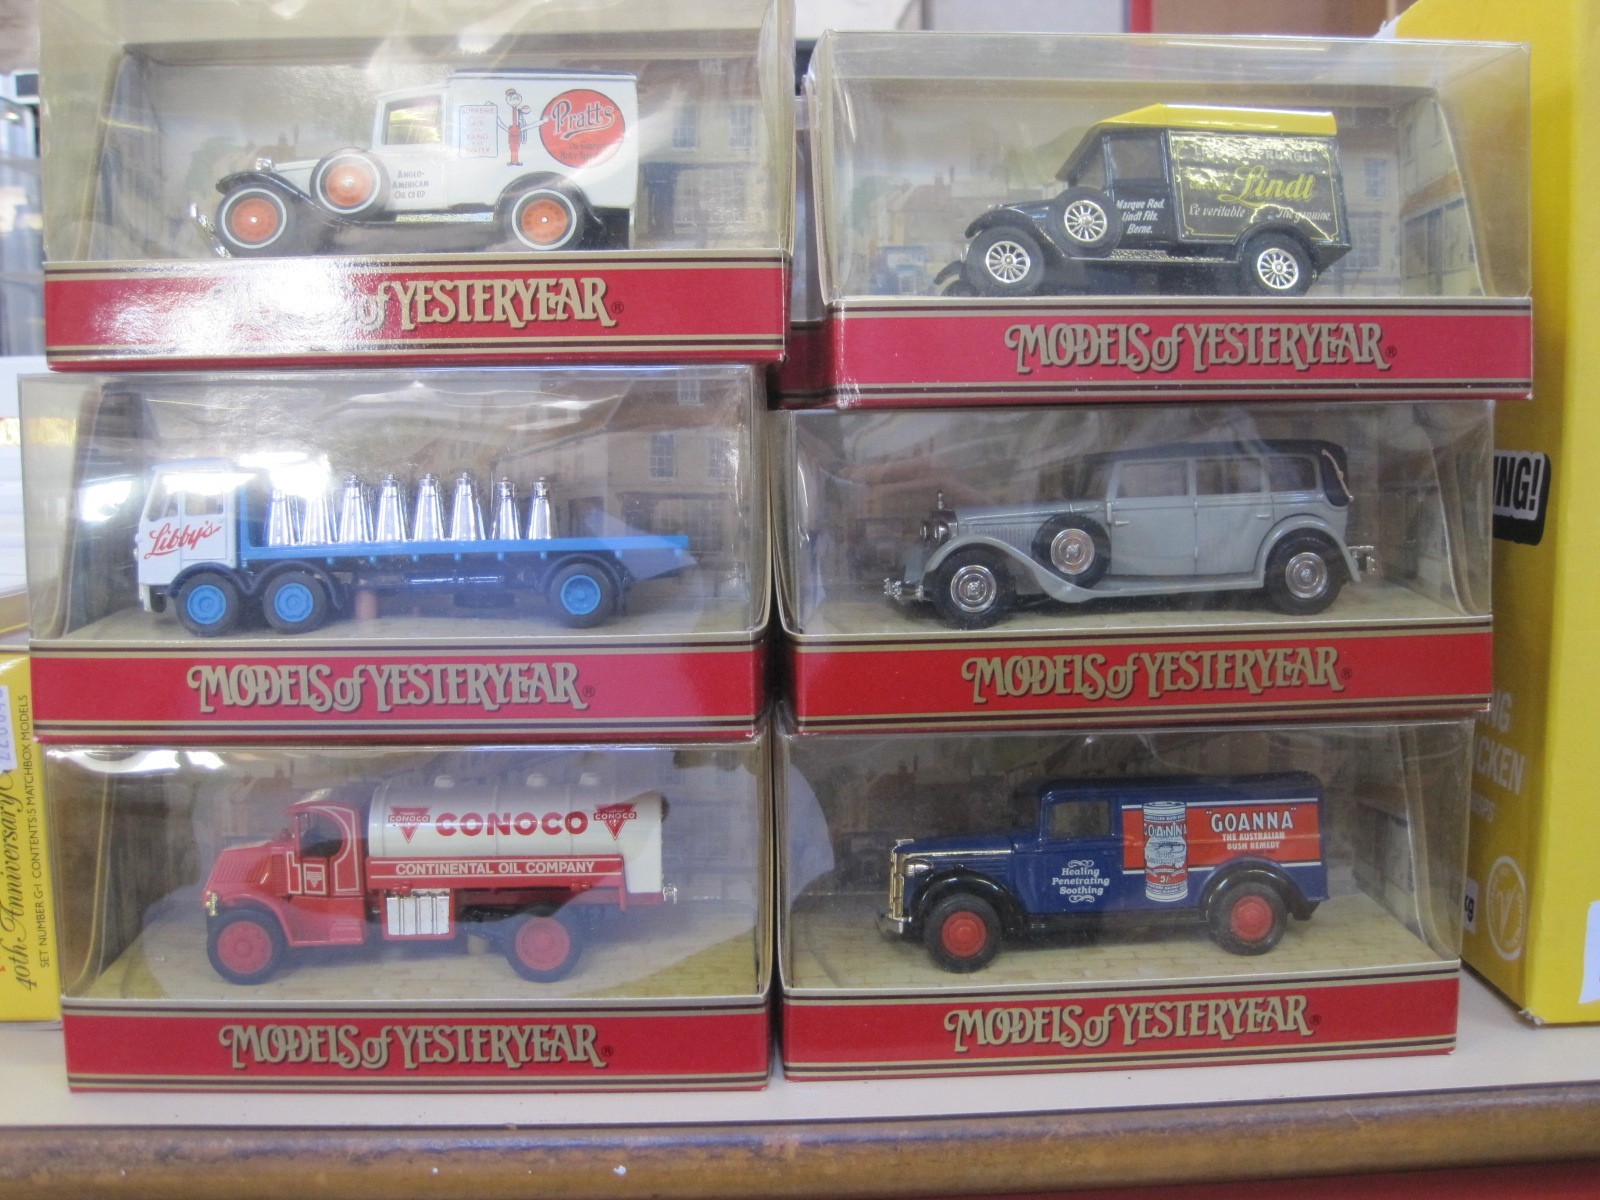 A quantity of approximately 200 boxed die cast Matchbox Models of Yester Year cars, three framed